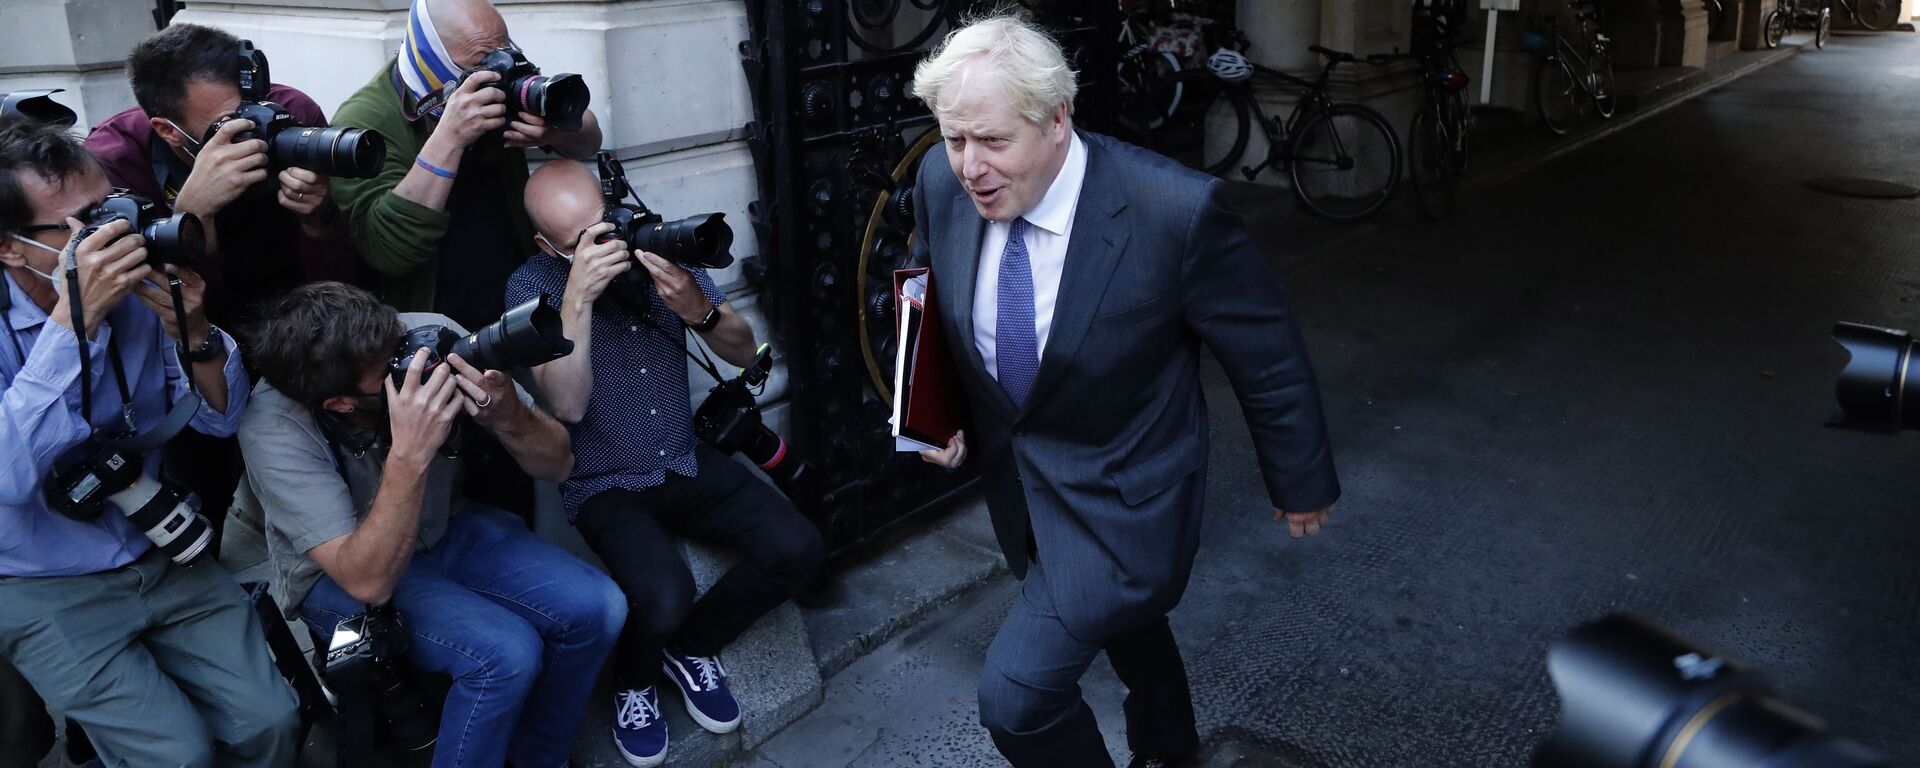 Britain's Prime Minister Boris Johnson walks past media photographers to his office in Downing Street after a cabinet meeting in London, Tuesday, Sept. 15, 2020. - Sputnik International, 1920, 22.02.2021